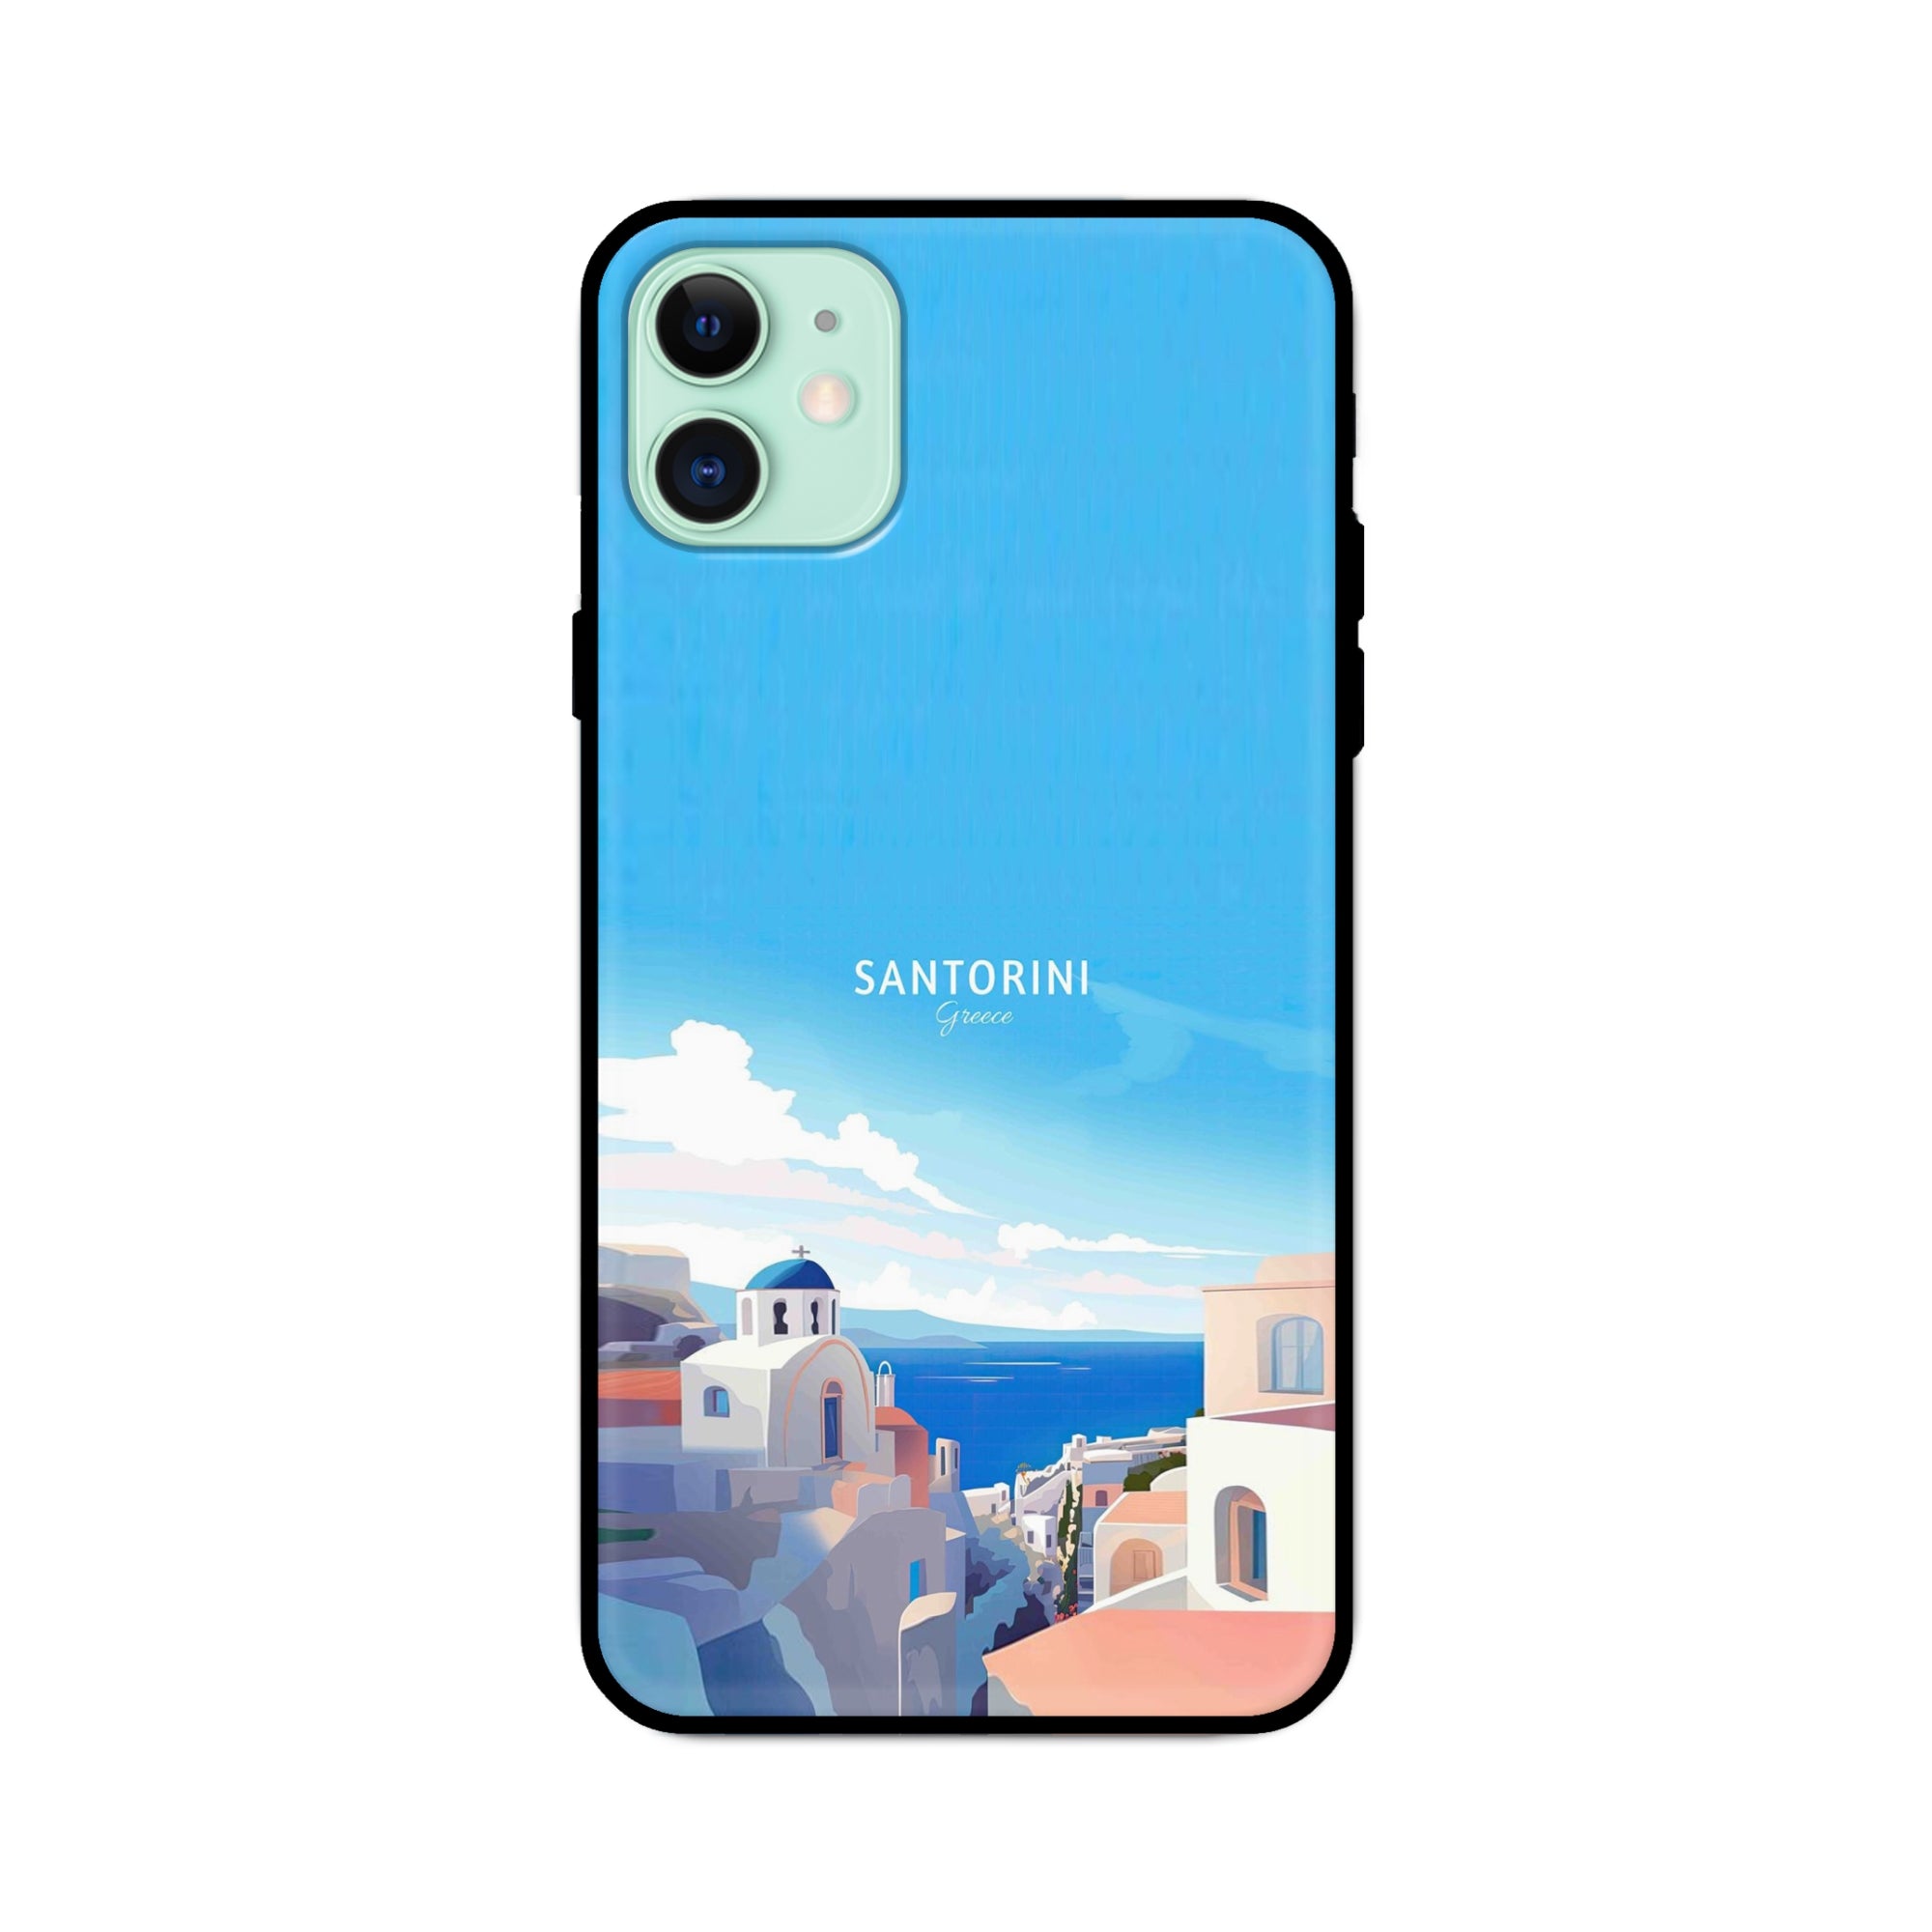 Buy Santorini Glass/Metal Back Mobile Phone Case/Cover For iPhone 11 Online